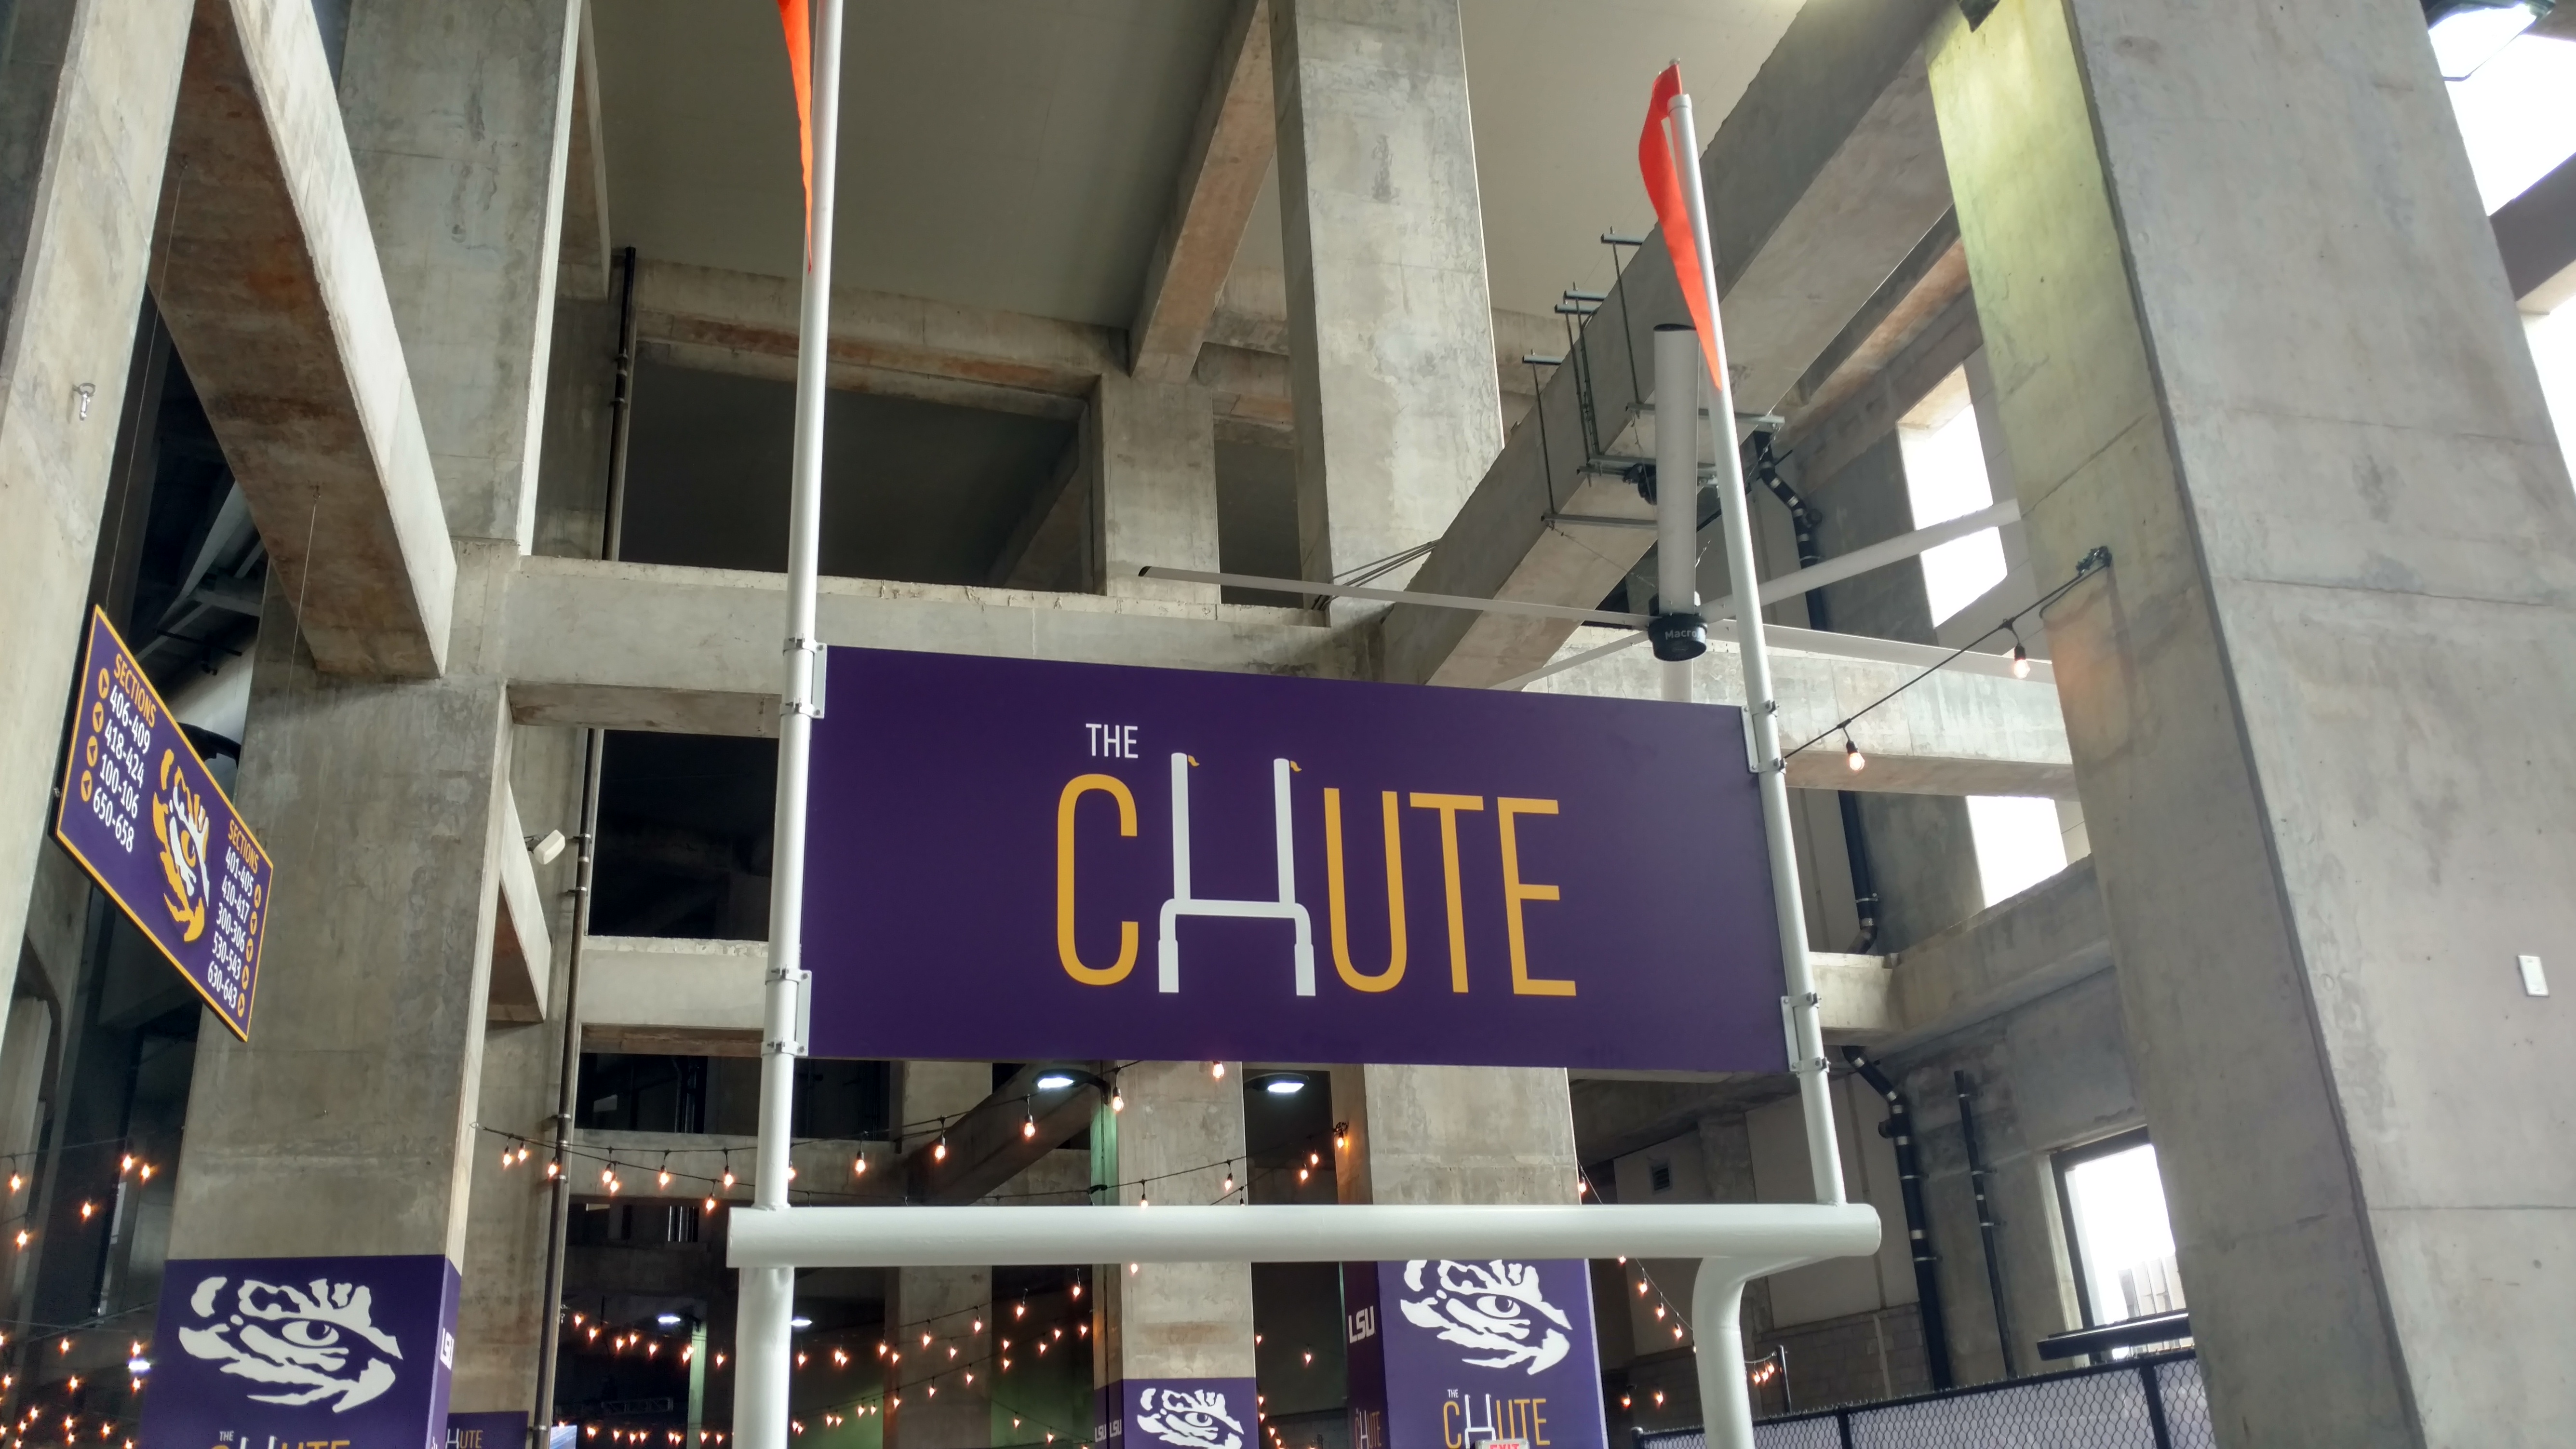 TIGER STADIUM WITH GREAT NEW FOOD ATTRACTIONS TO GO WITH FOOTBALL